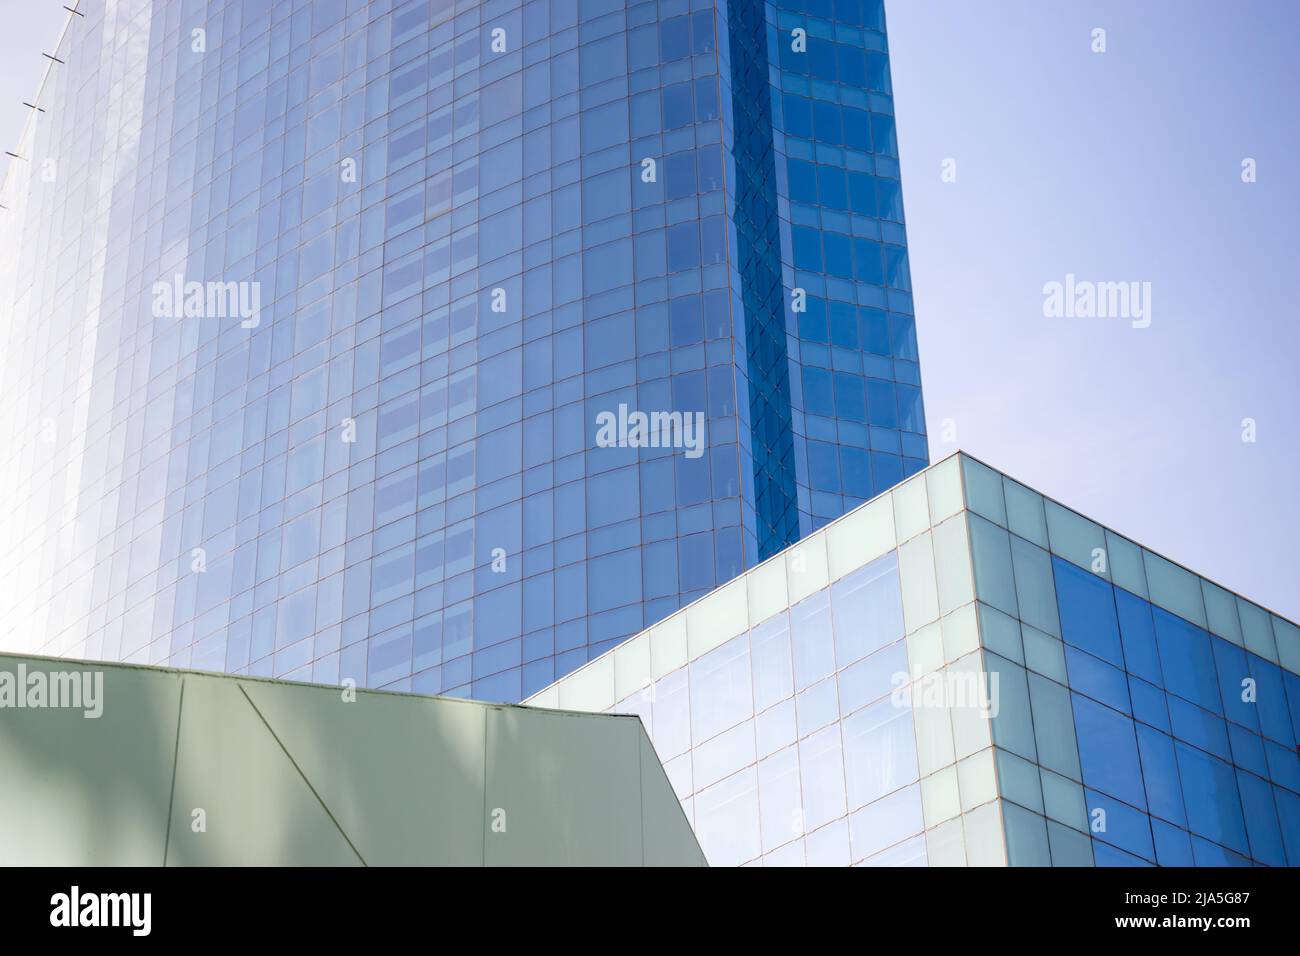 blue abstract architecural  view of glass skyscrapers with geometric pattern. Stock Photo